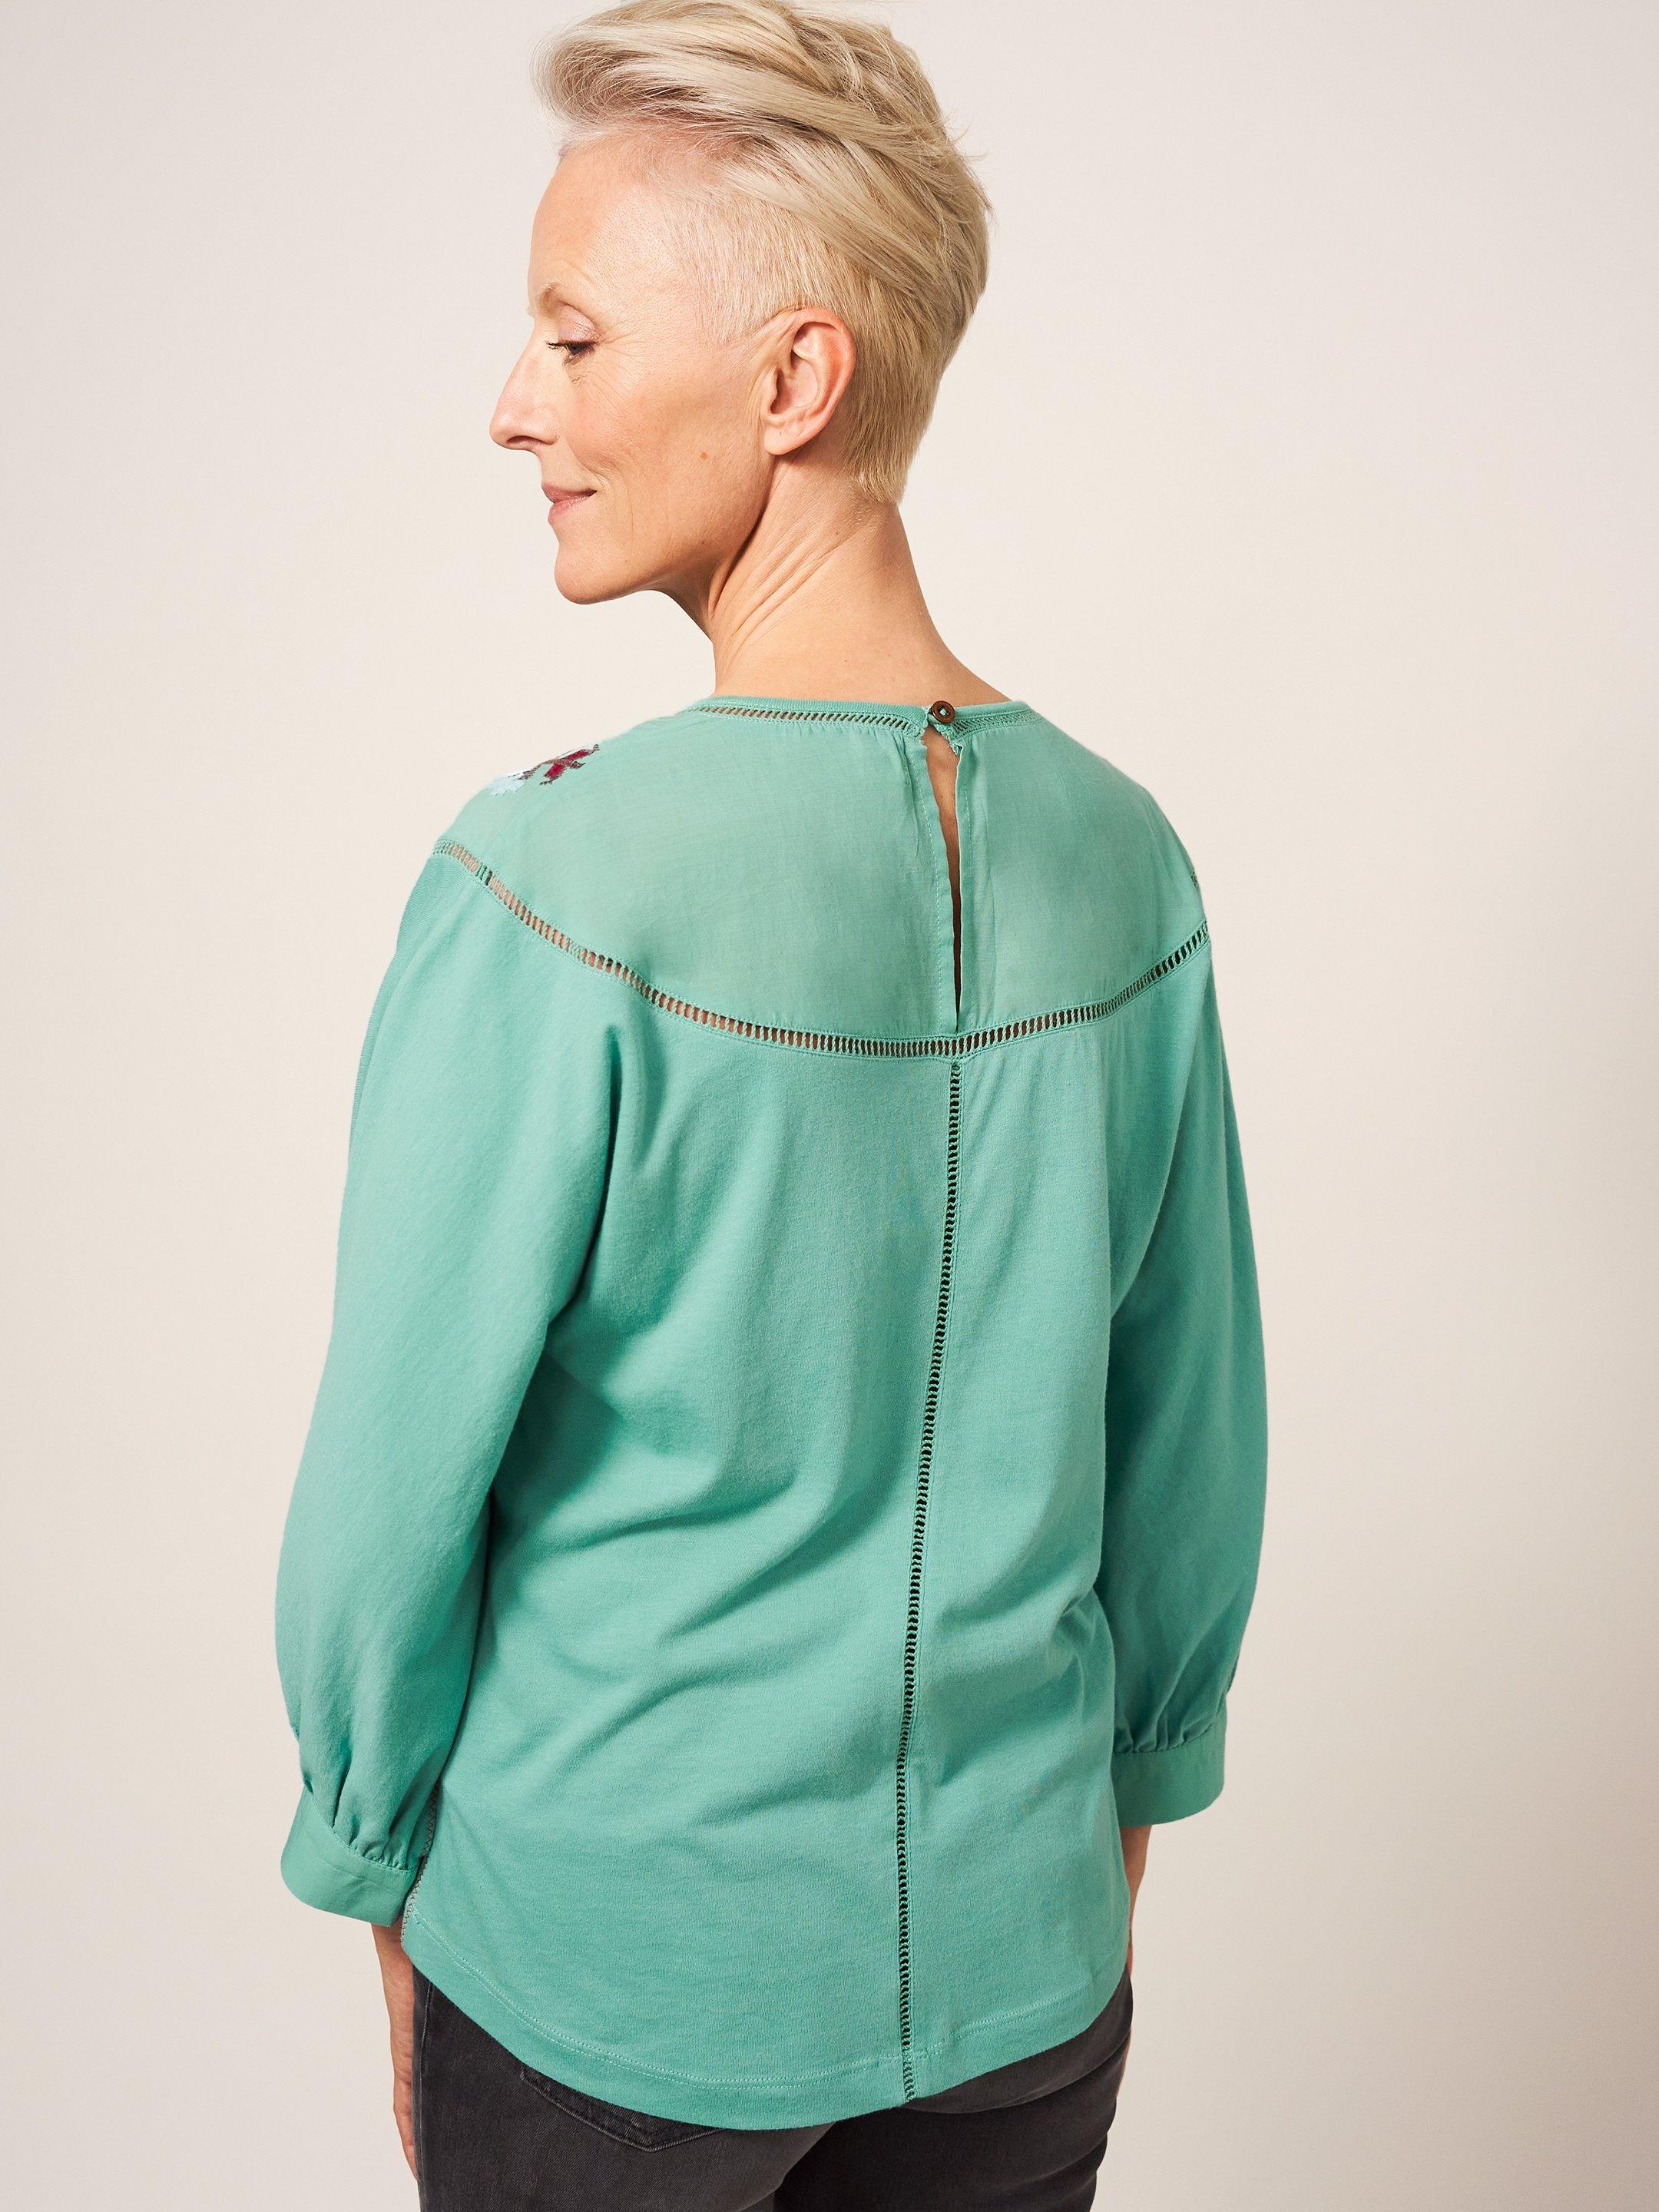 MOLLIE EMBROIDERED TOP in TEAL MLT - MODEL BACK